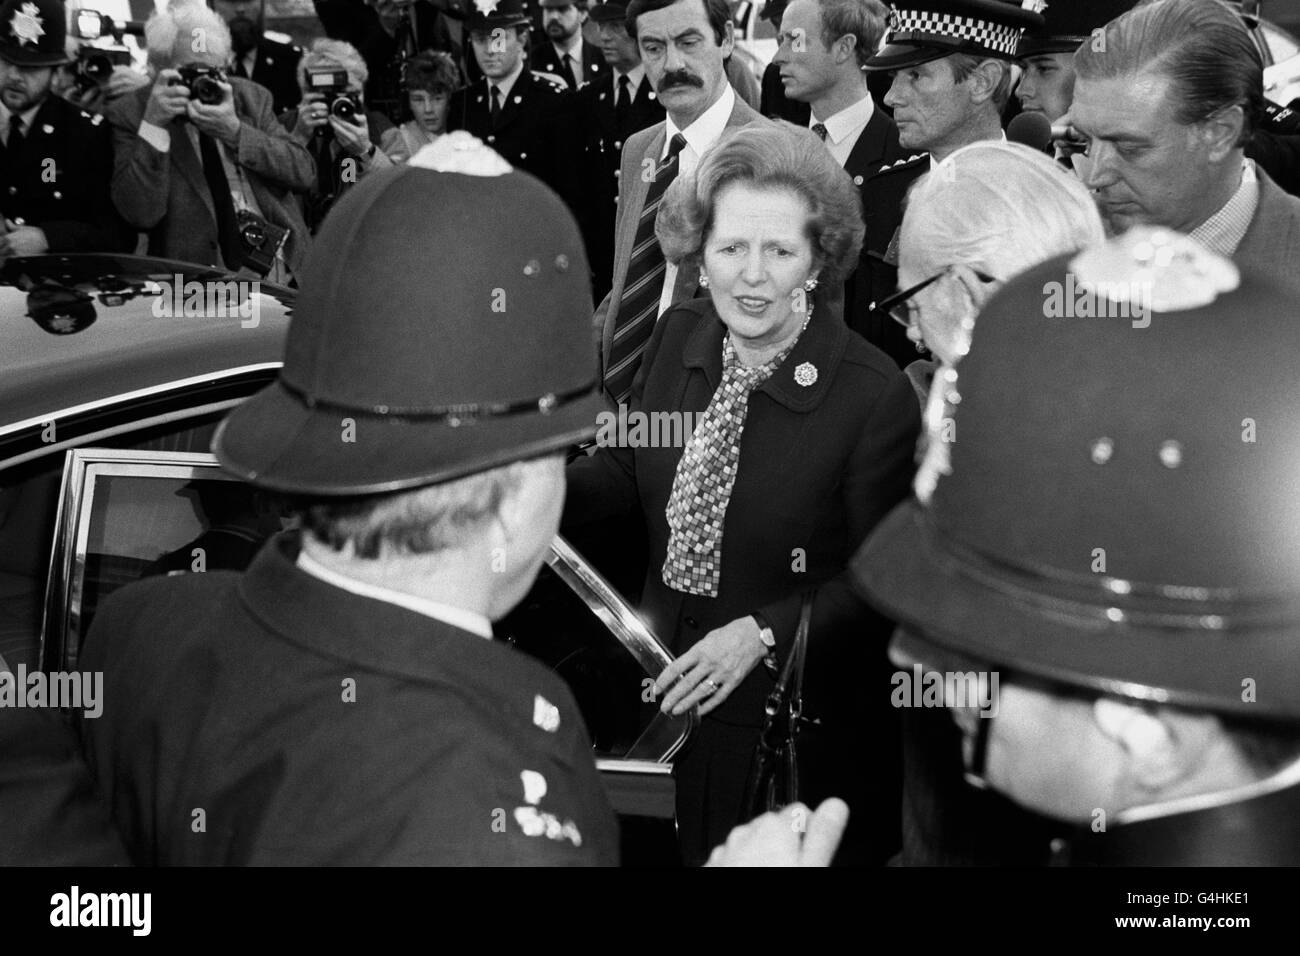 Prime Minister Margaret Thatcher and her husband Denis, leaving the Royal Sussex County Hospital in Brighton after visiting the victims of the IRA bomb explosion which occurred at the hotel in which she was staying - the Grand Hotel in Brighton. Five people were killed in the blast and 31 injured. Stock Photo